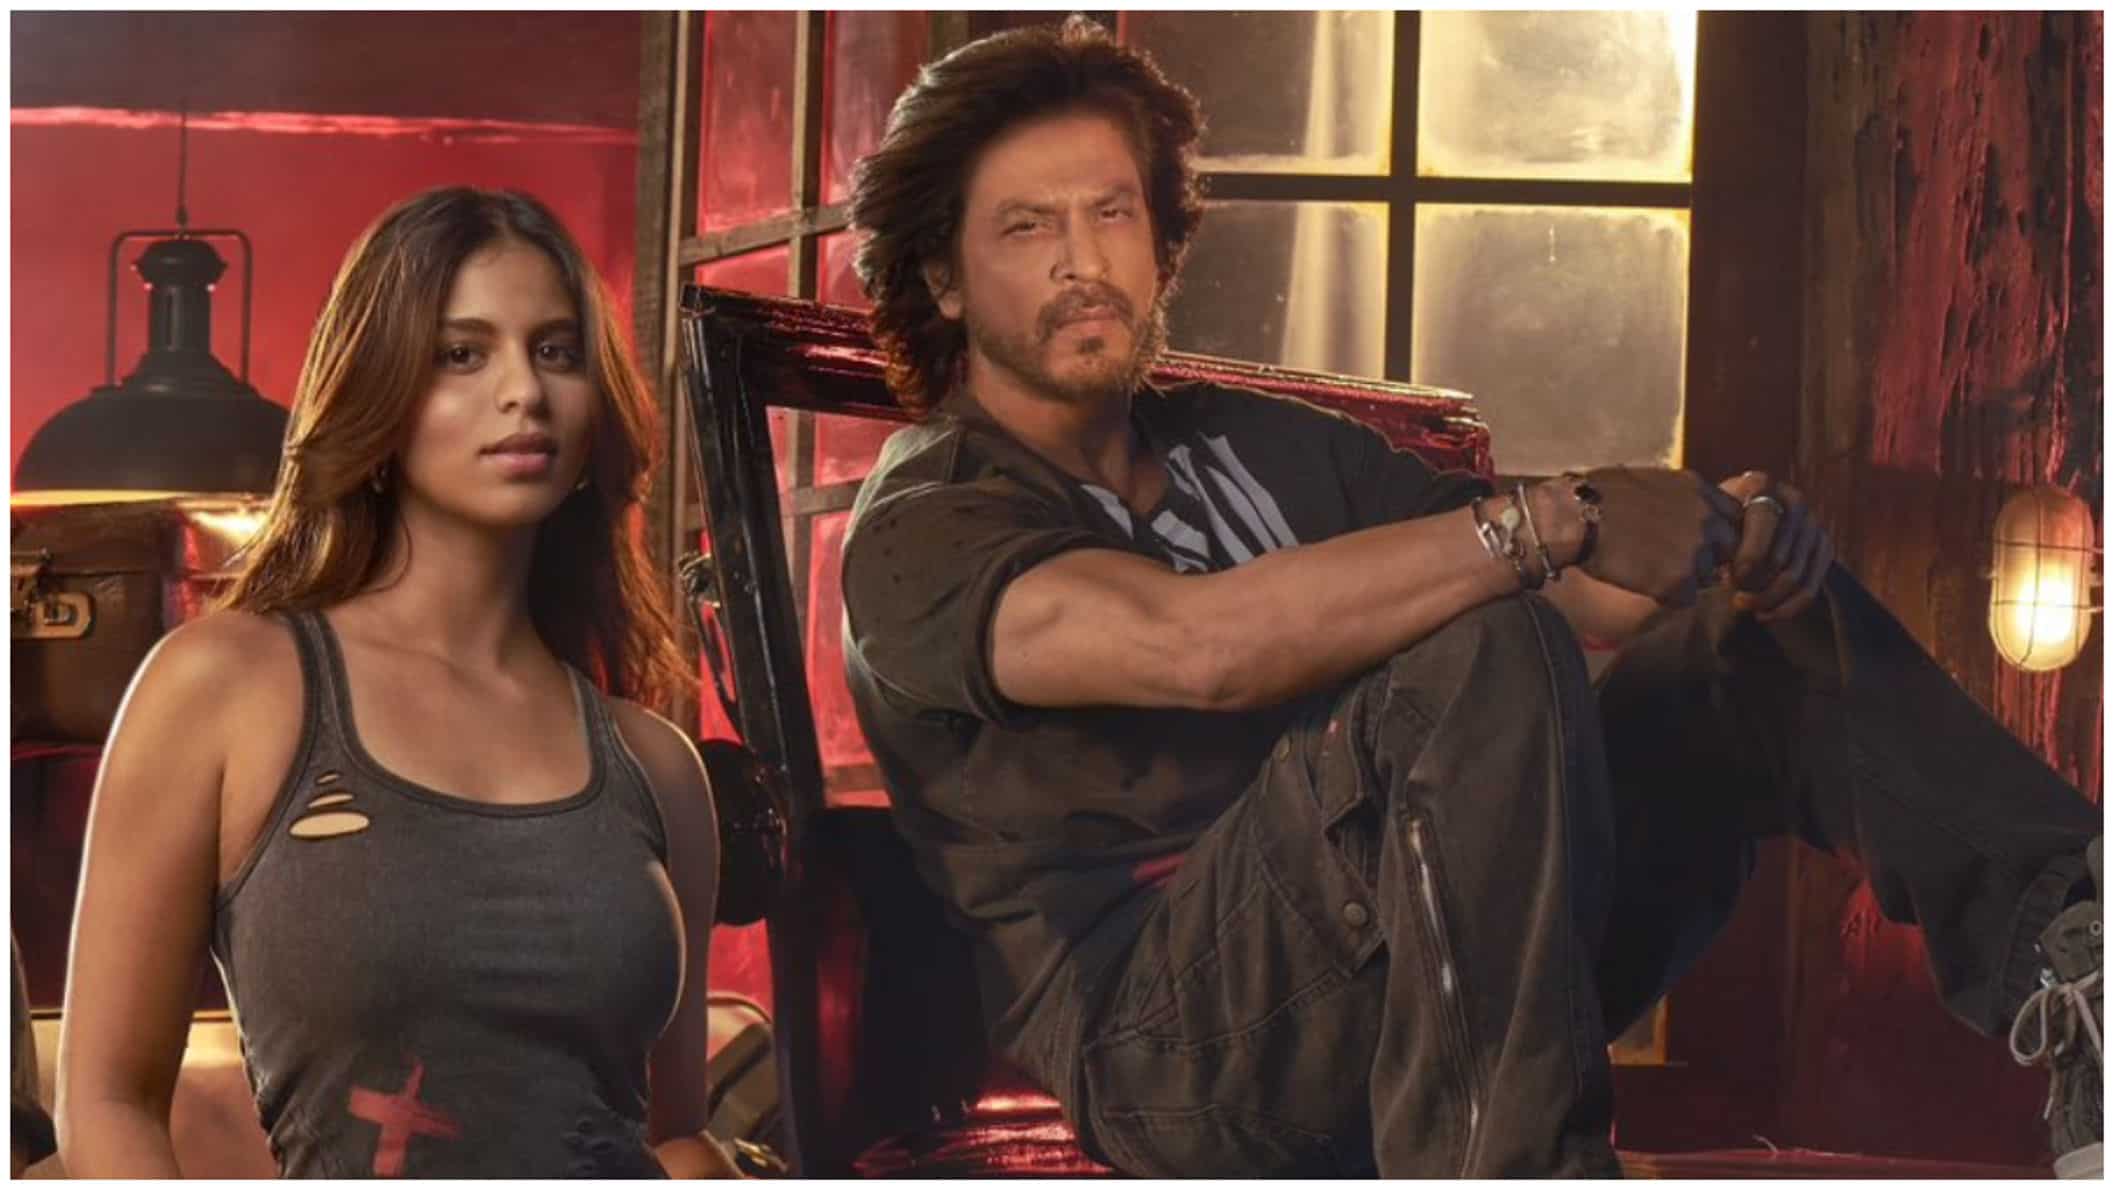 Shah Rukh Khan to invest Rs 200 crores in Suhana Khan’s theatrical debut King? Here’s the latest buzz